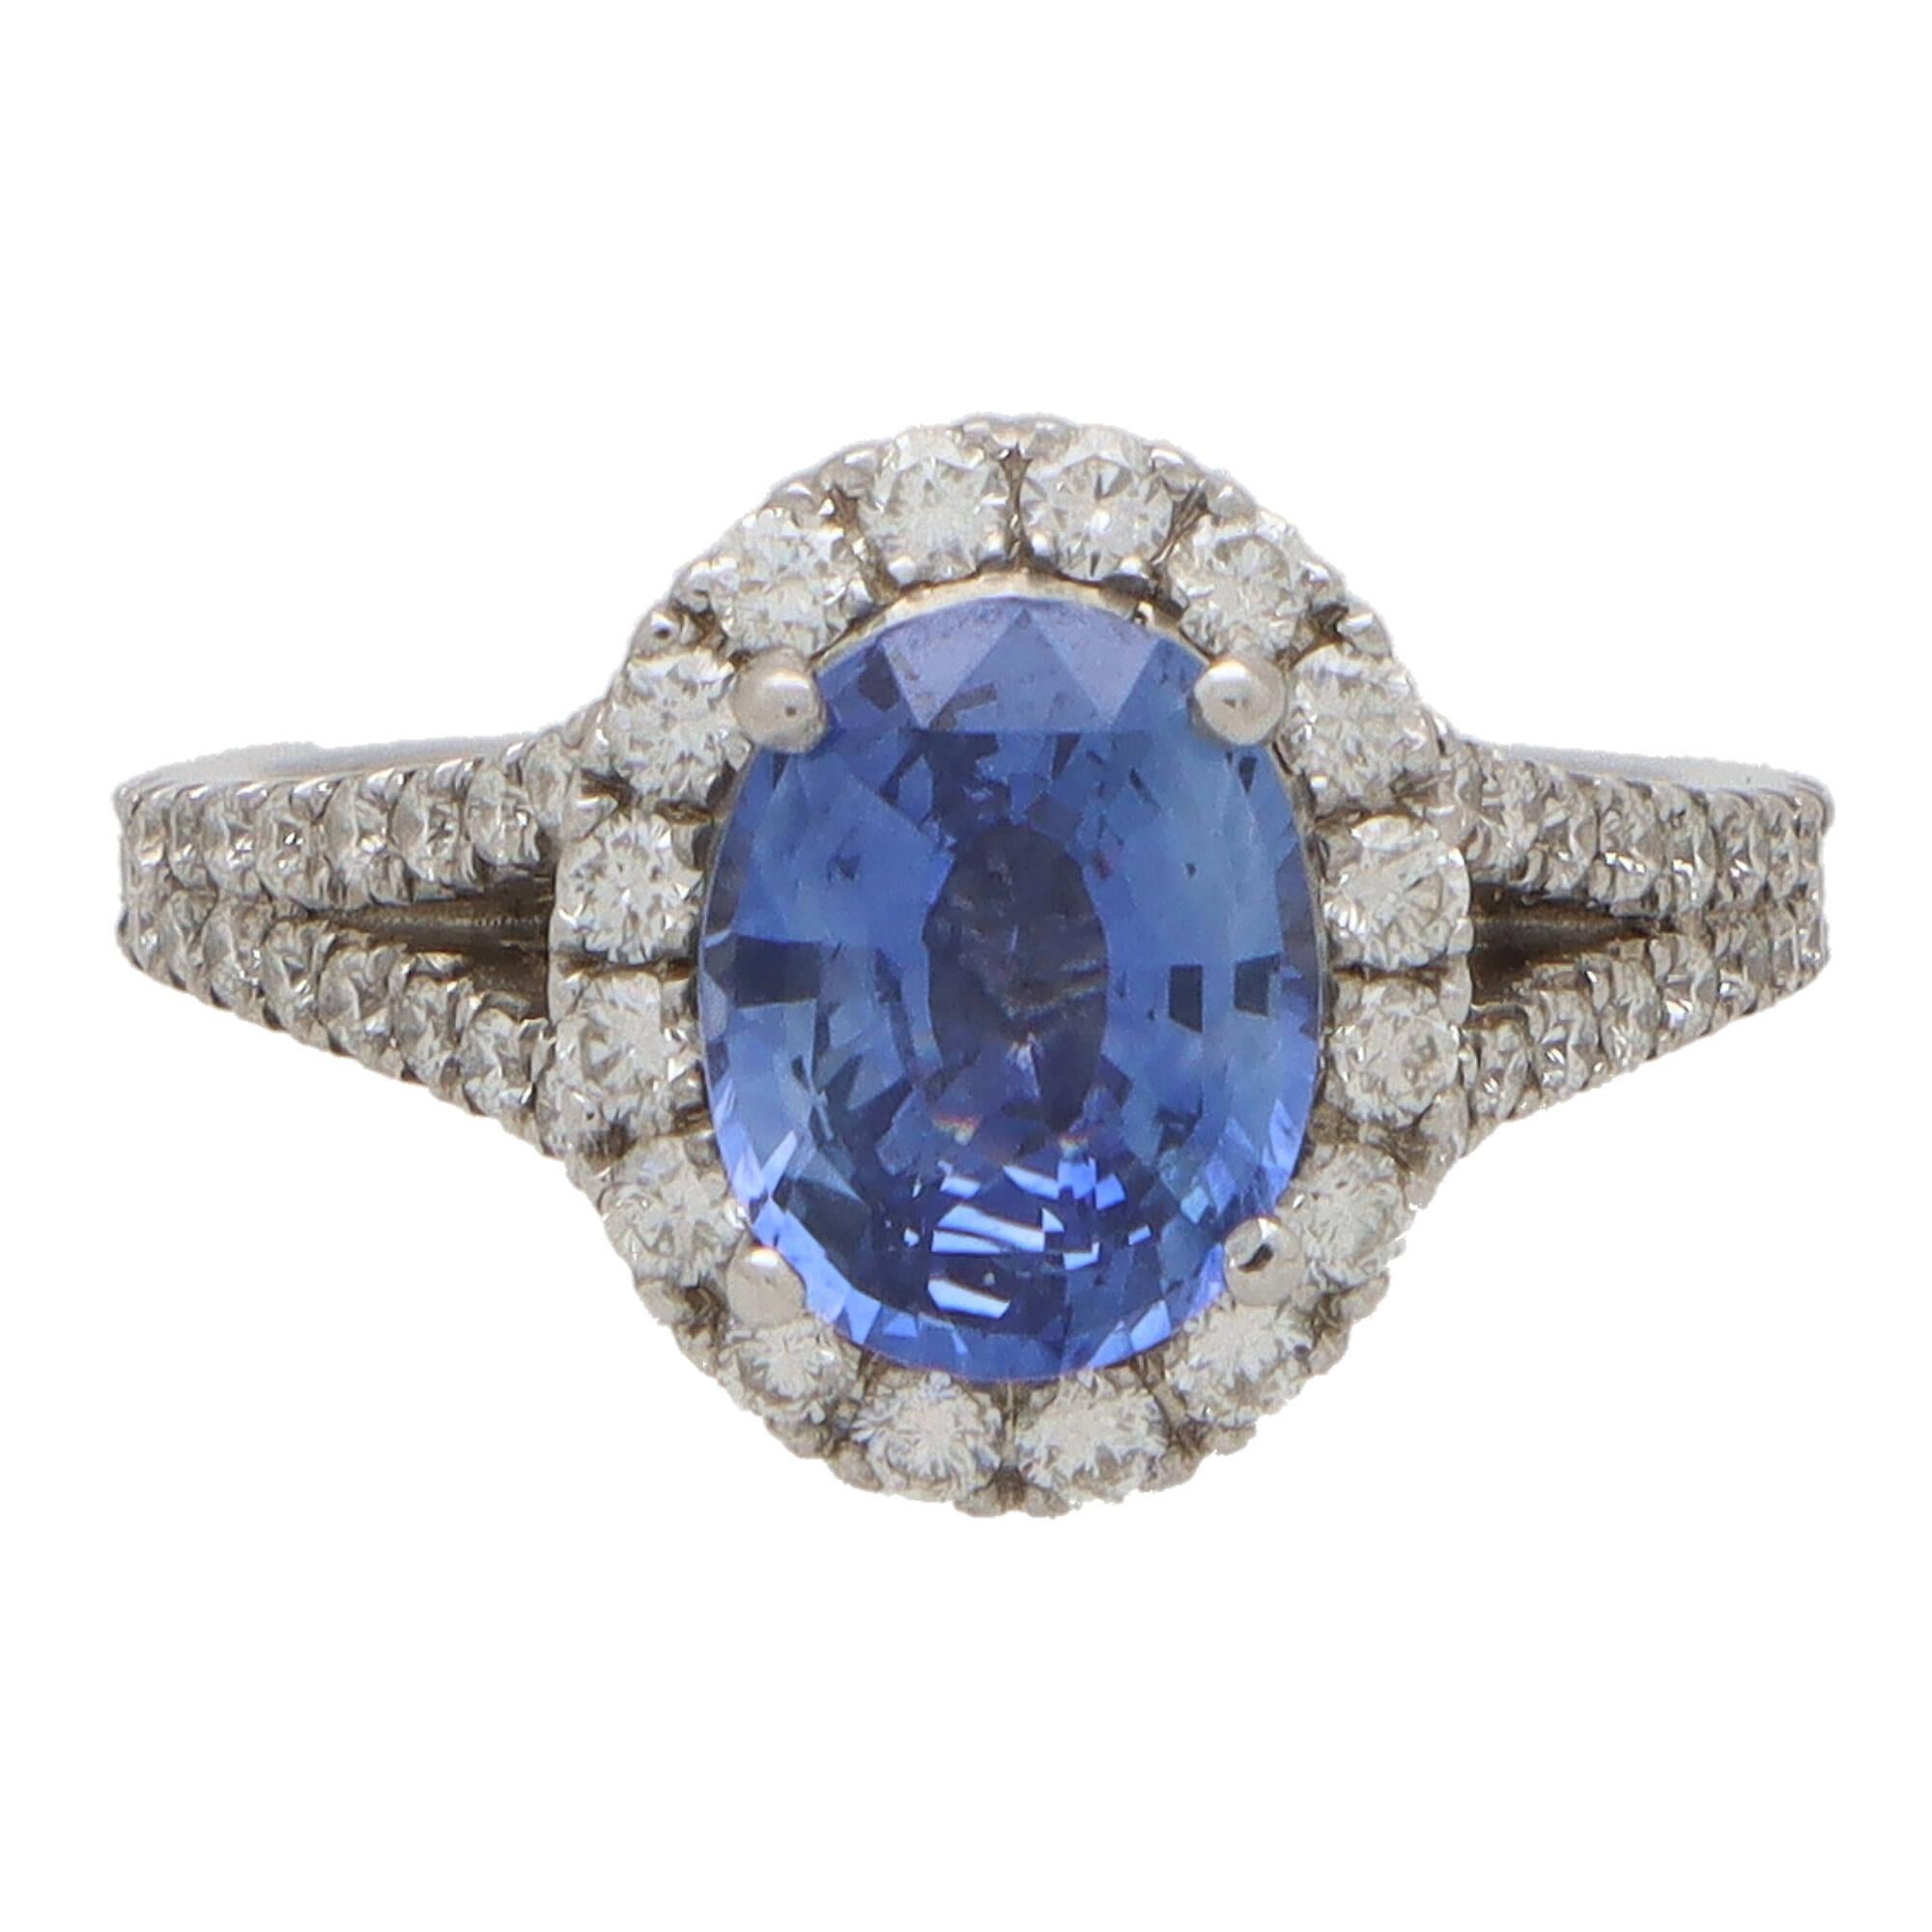 A beautiful bright blue sapphire and diamond oval halo ring set in 18k white gold.

The ring centrally features a beautiful blue coloured oval shaped sapphire surrounded by a halo of 16 round brilliant-cut diamonds. Each shoulder is split and micro